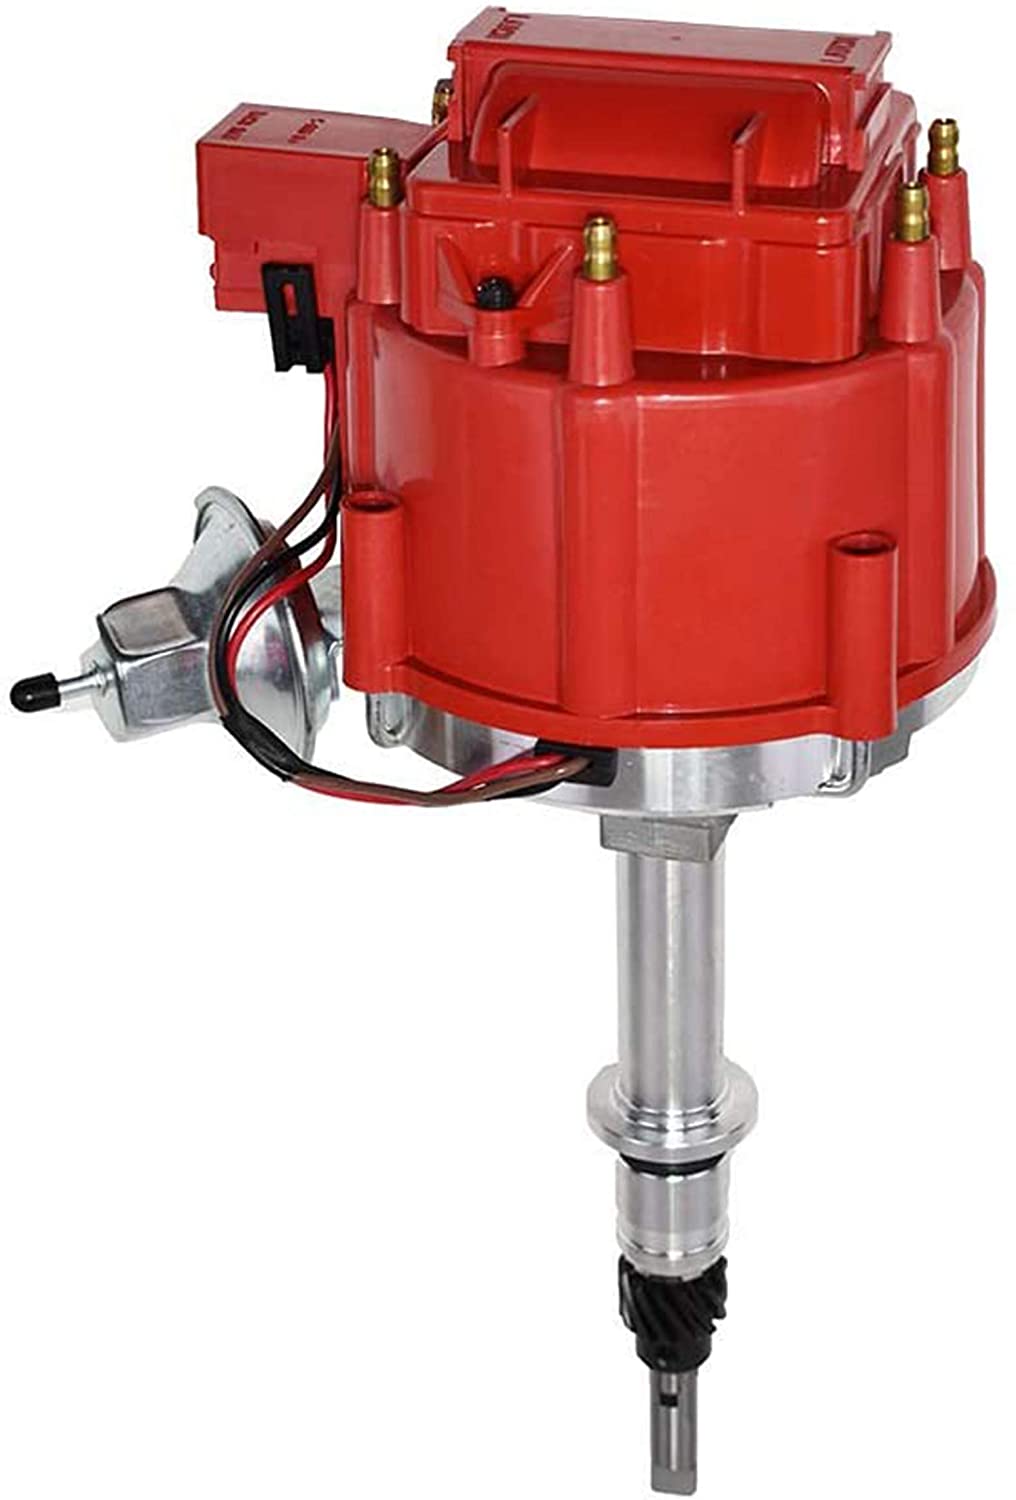 A-Team Performance Complete HEI Distributor 65K Coil 7500 RPM Compatible With Chevrolet Chevy GM GMC Truck Late Model Inline 6 Cylinder 230 250 292 One Wire Installation Red Cap (Red)